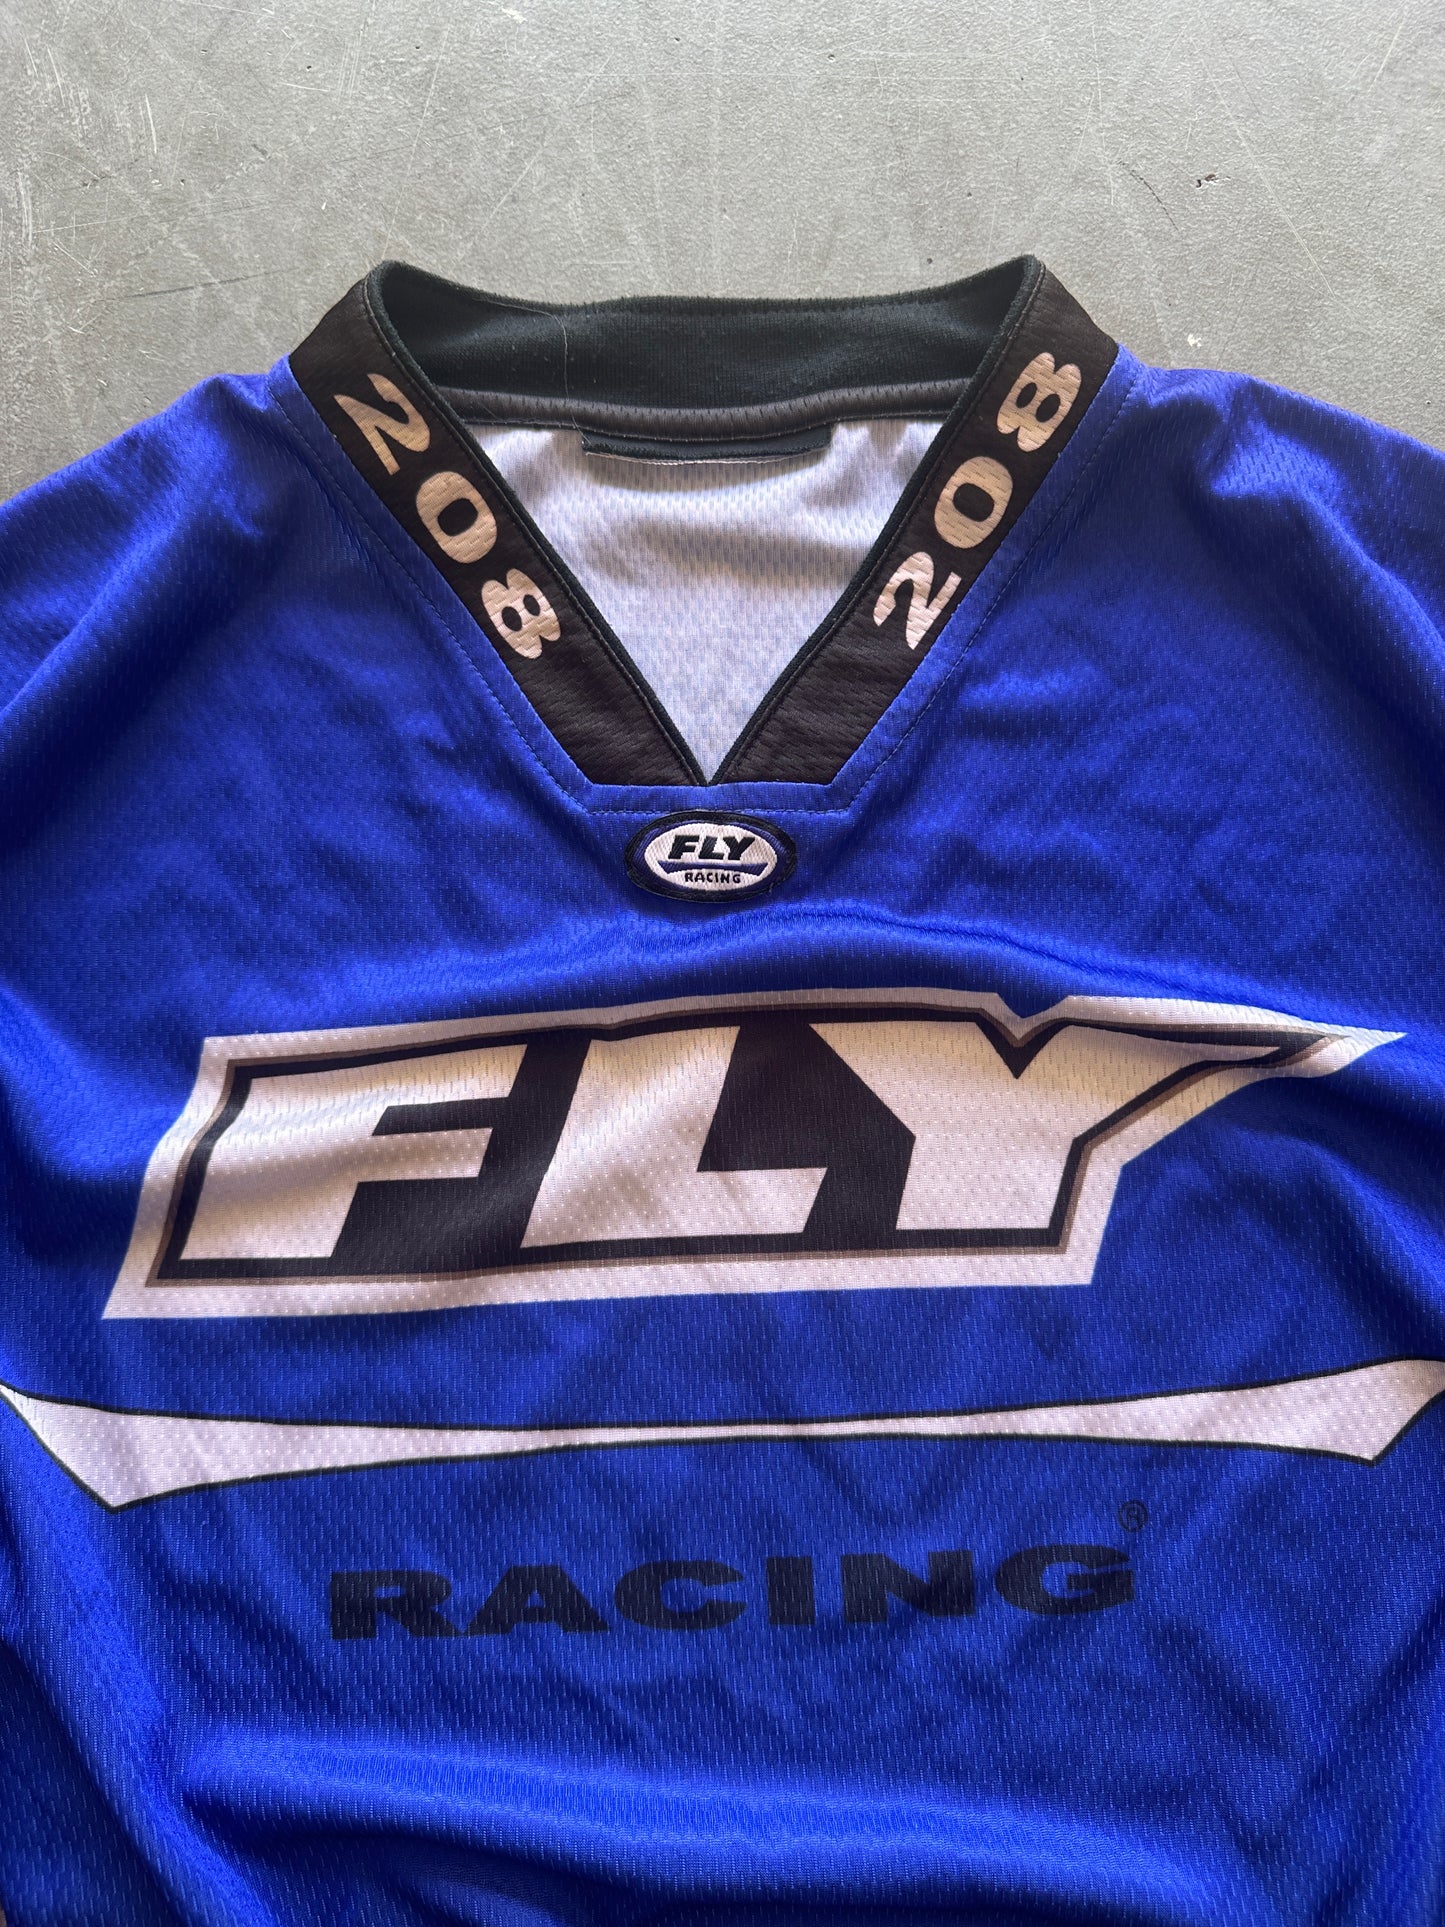 Fly Racing Vintage Long-Sleeve Jersey Size XL